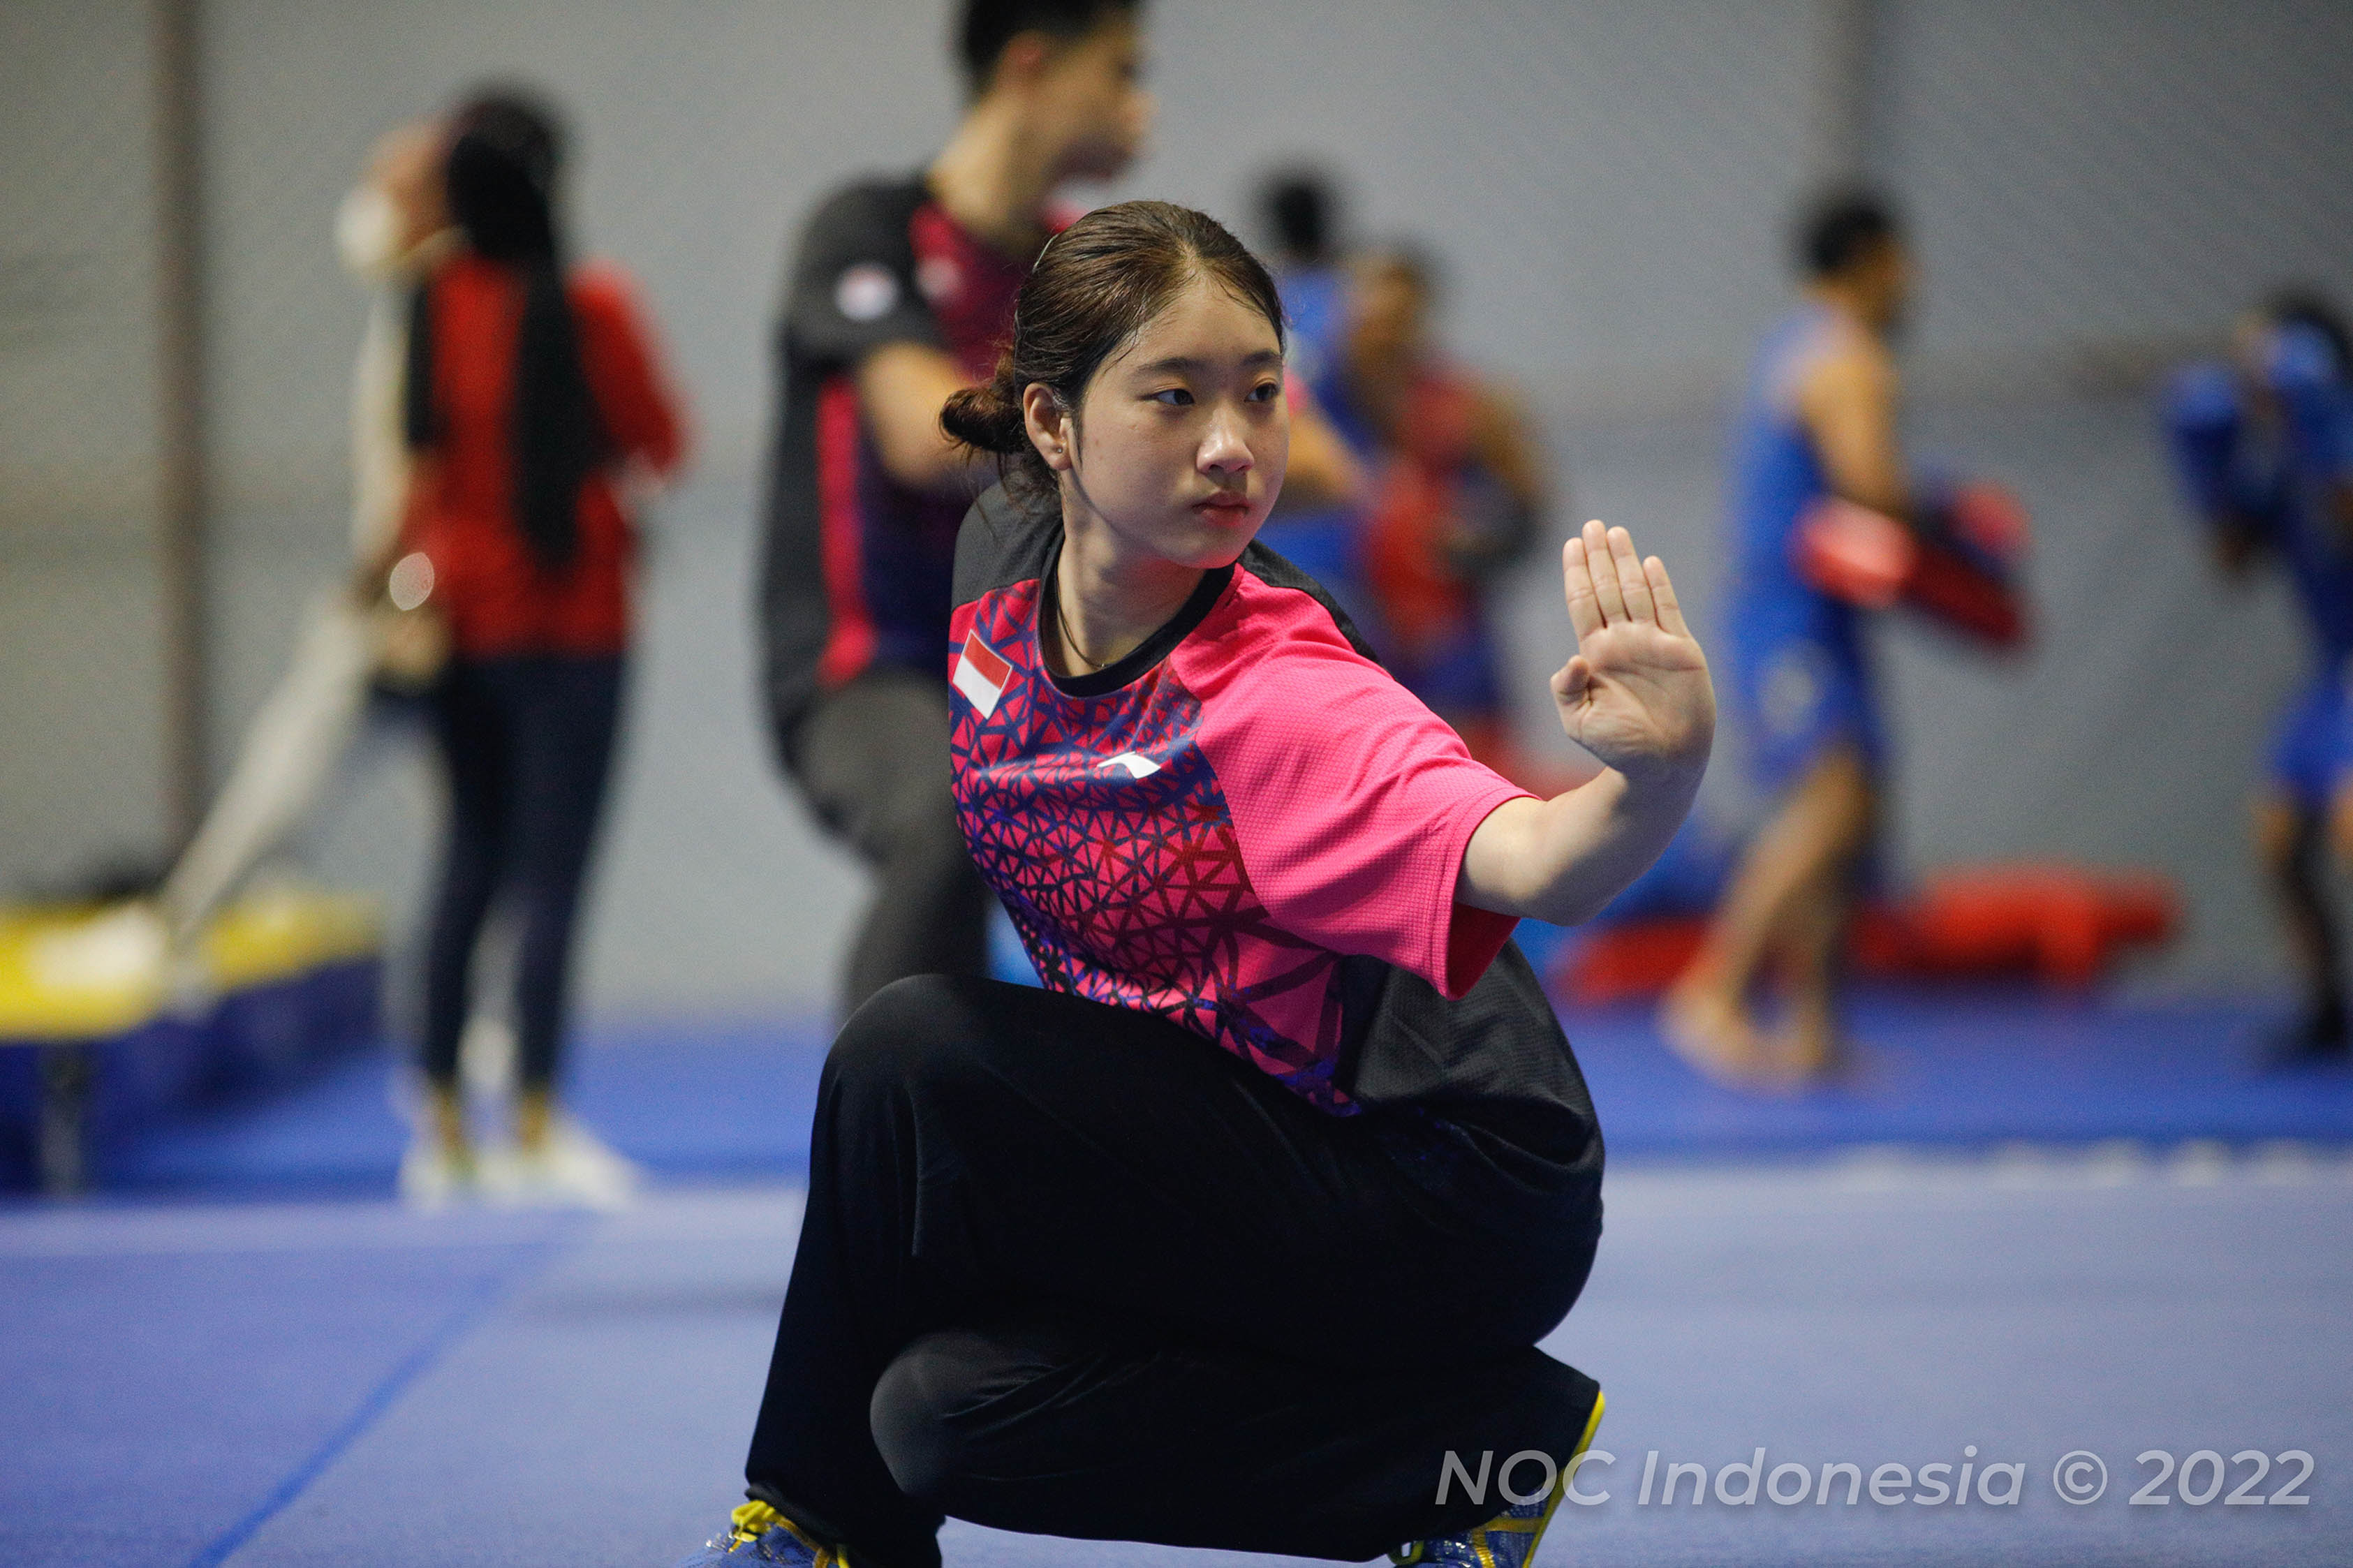 Indonesia Olympic Commitee - CdM Team optimistic for Wushu’s Medal Chance